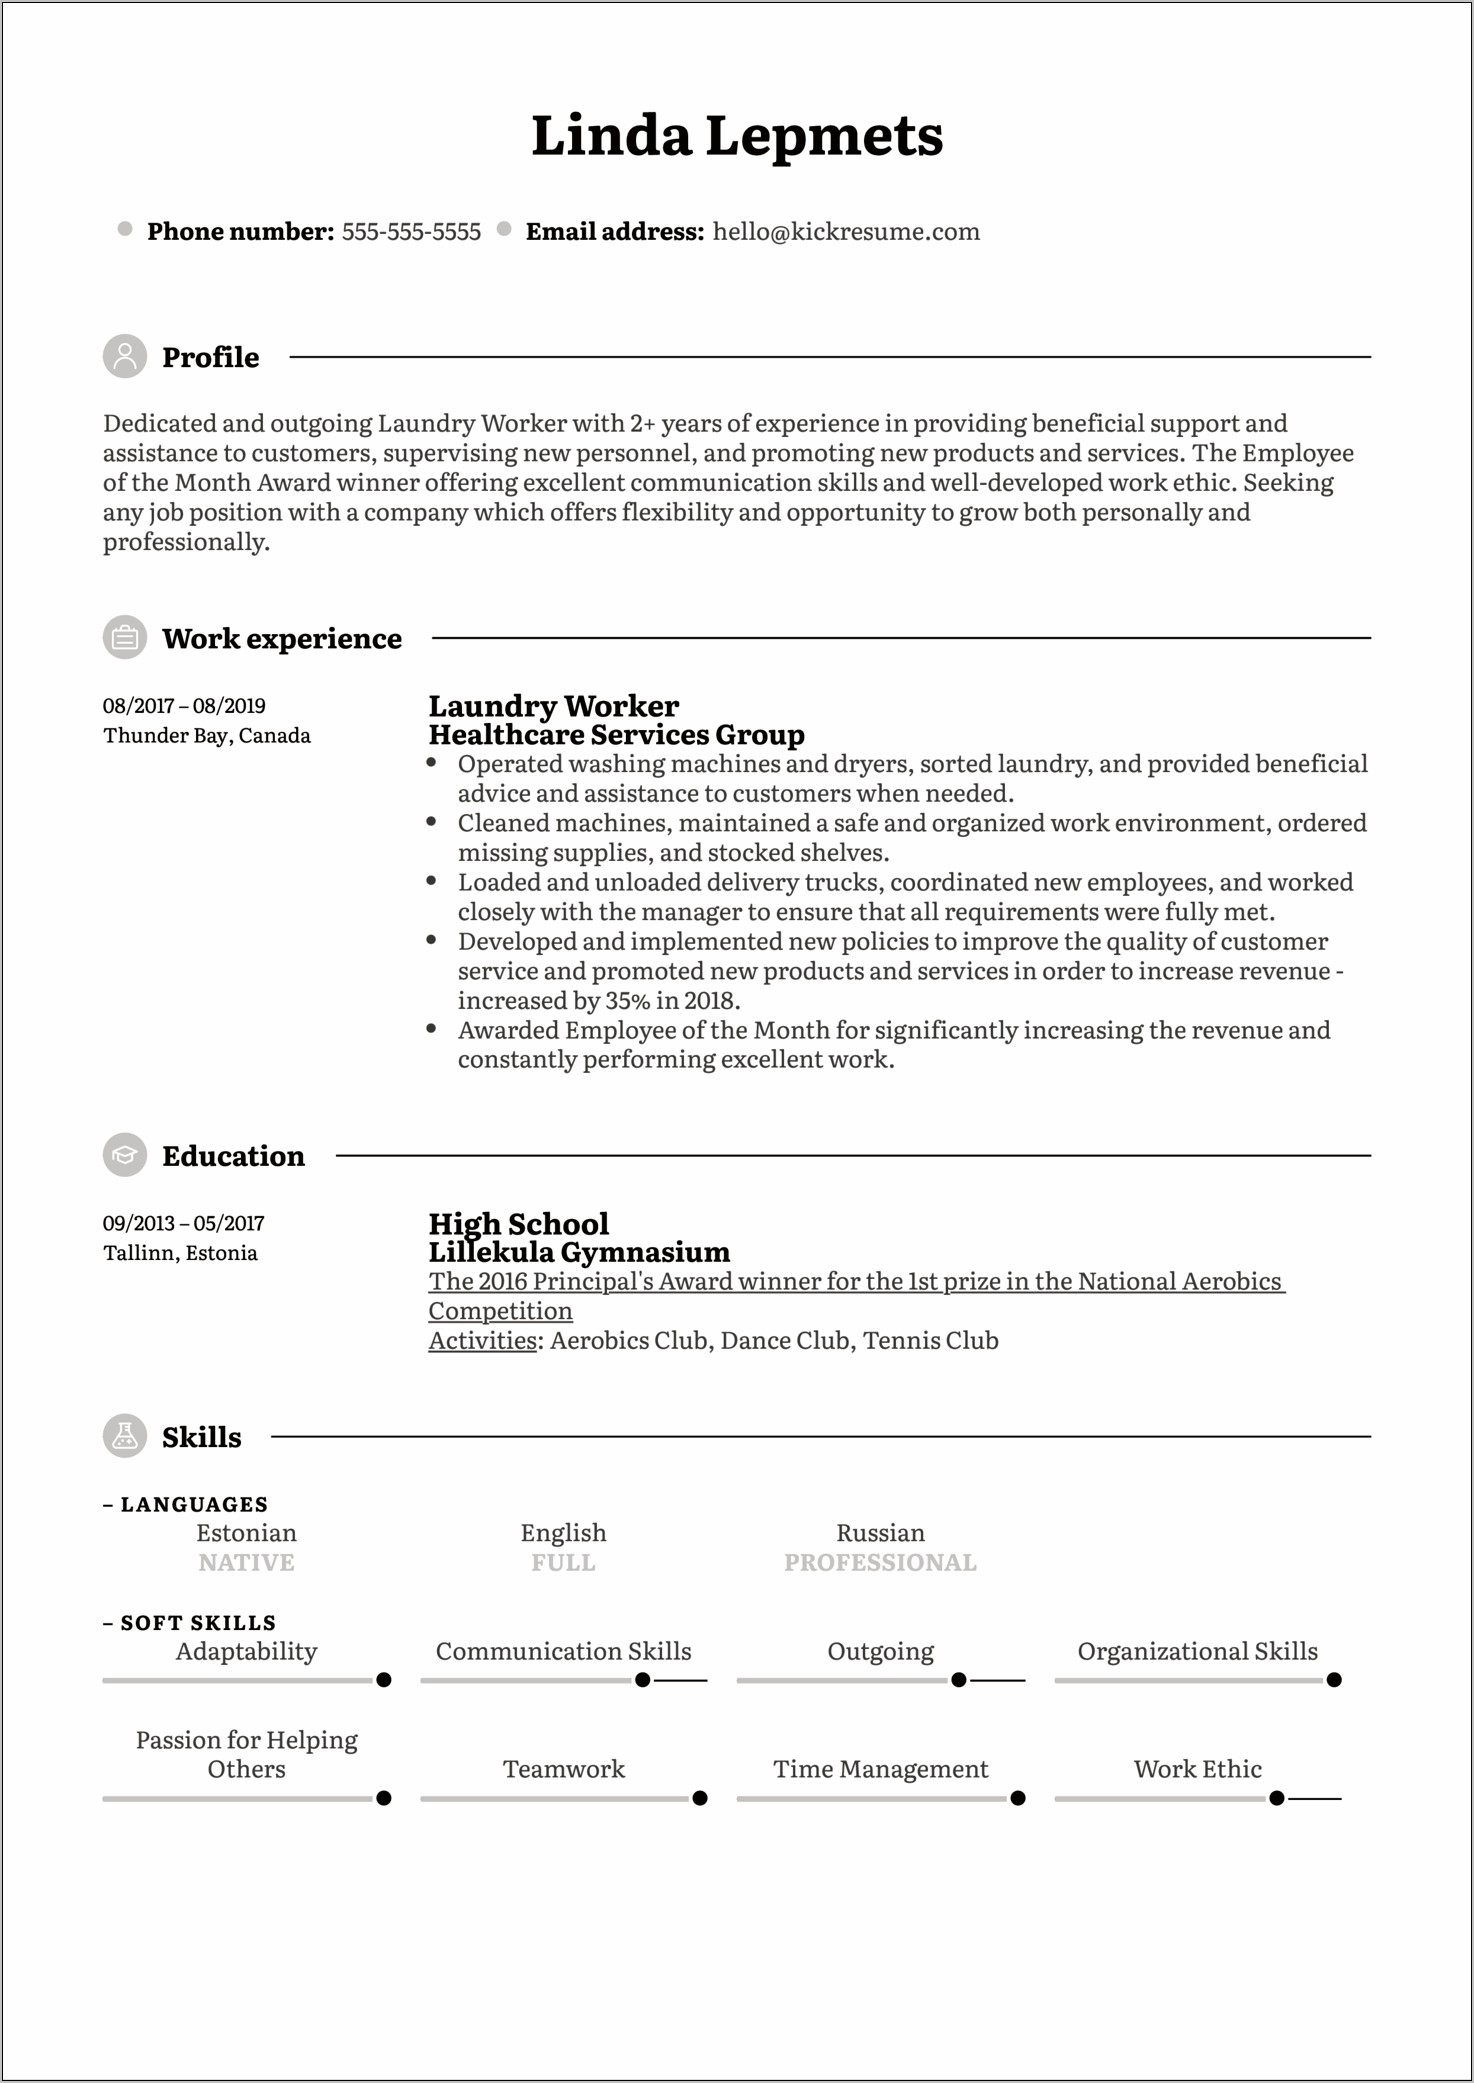 Resume With Housekeeoing And Laundry Experience